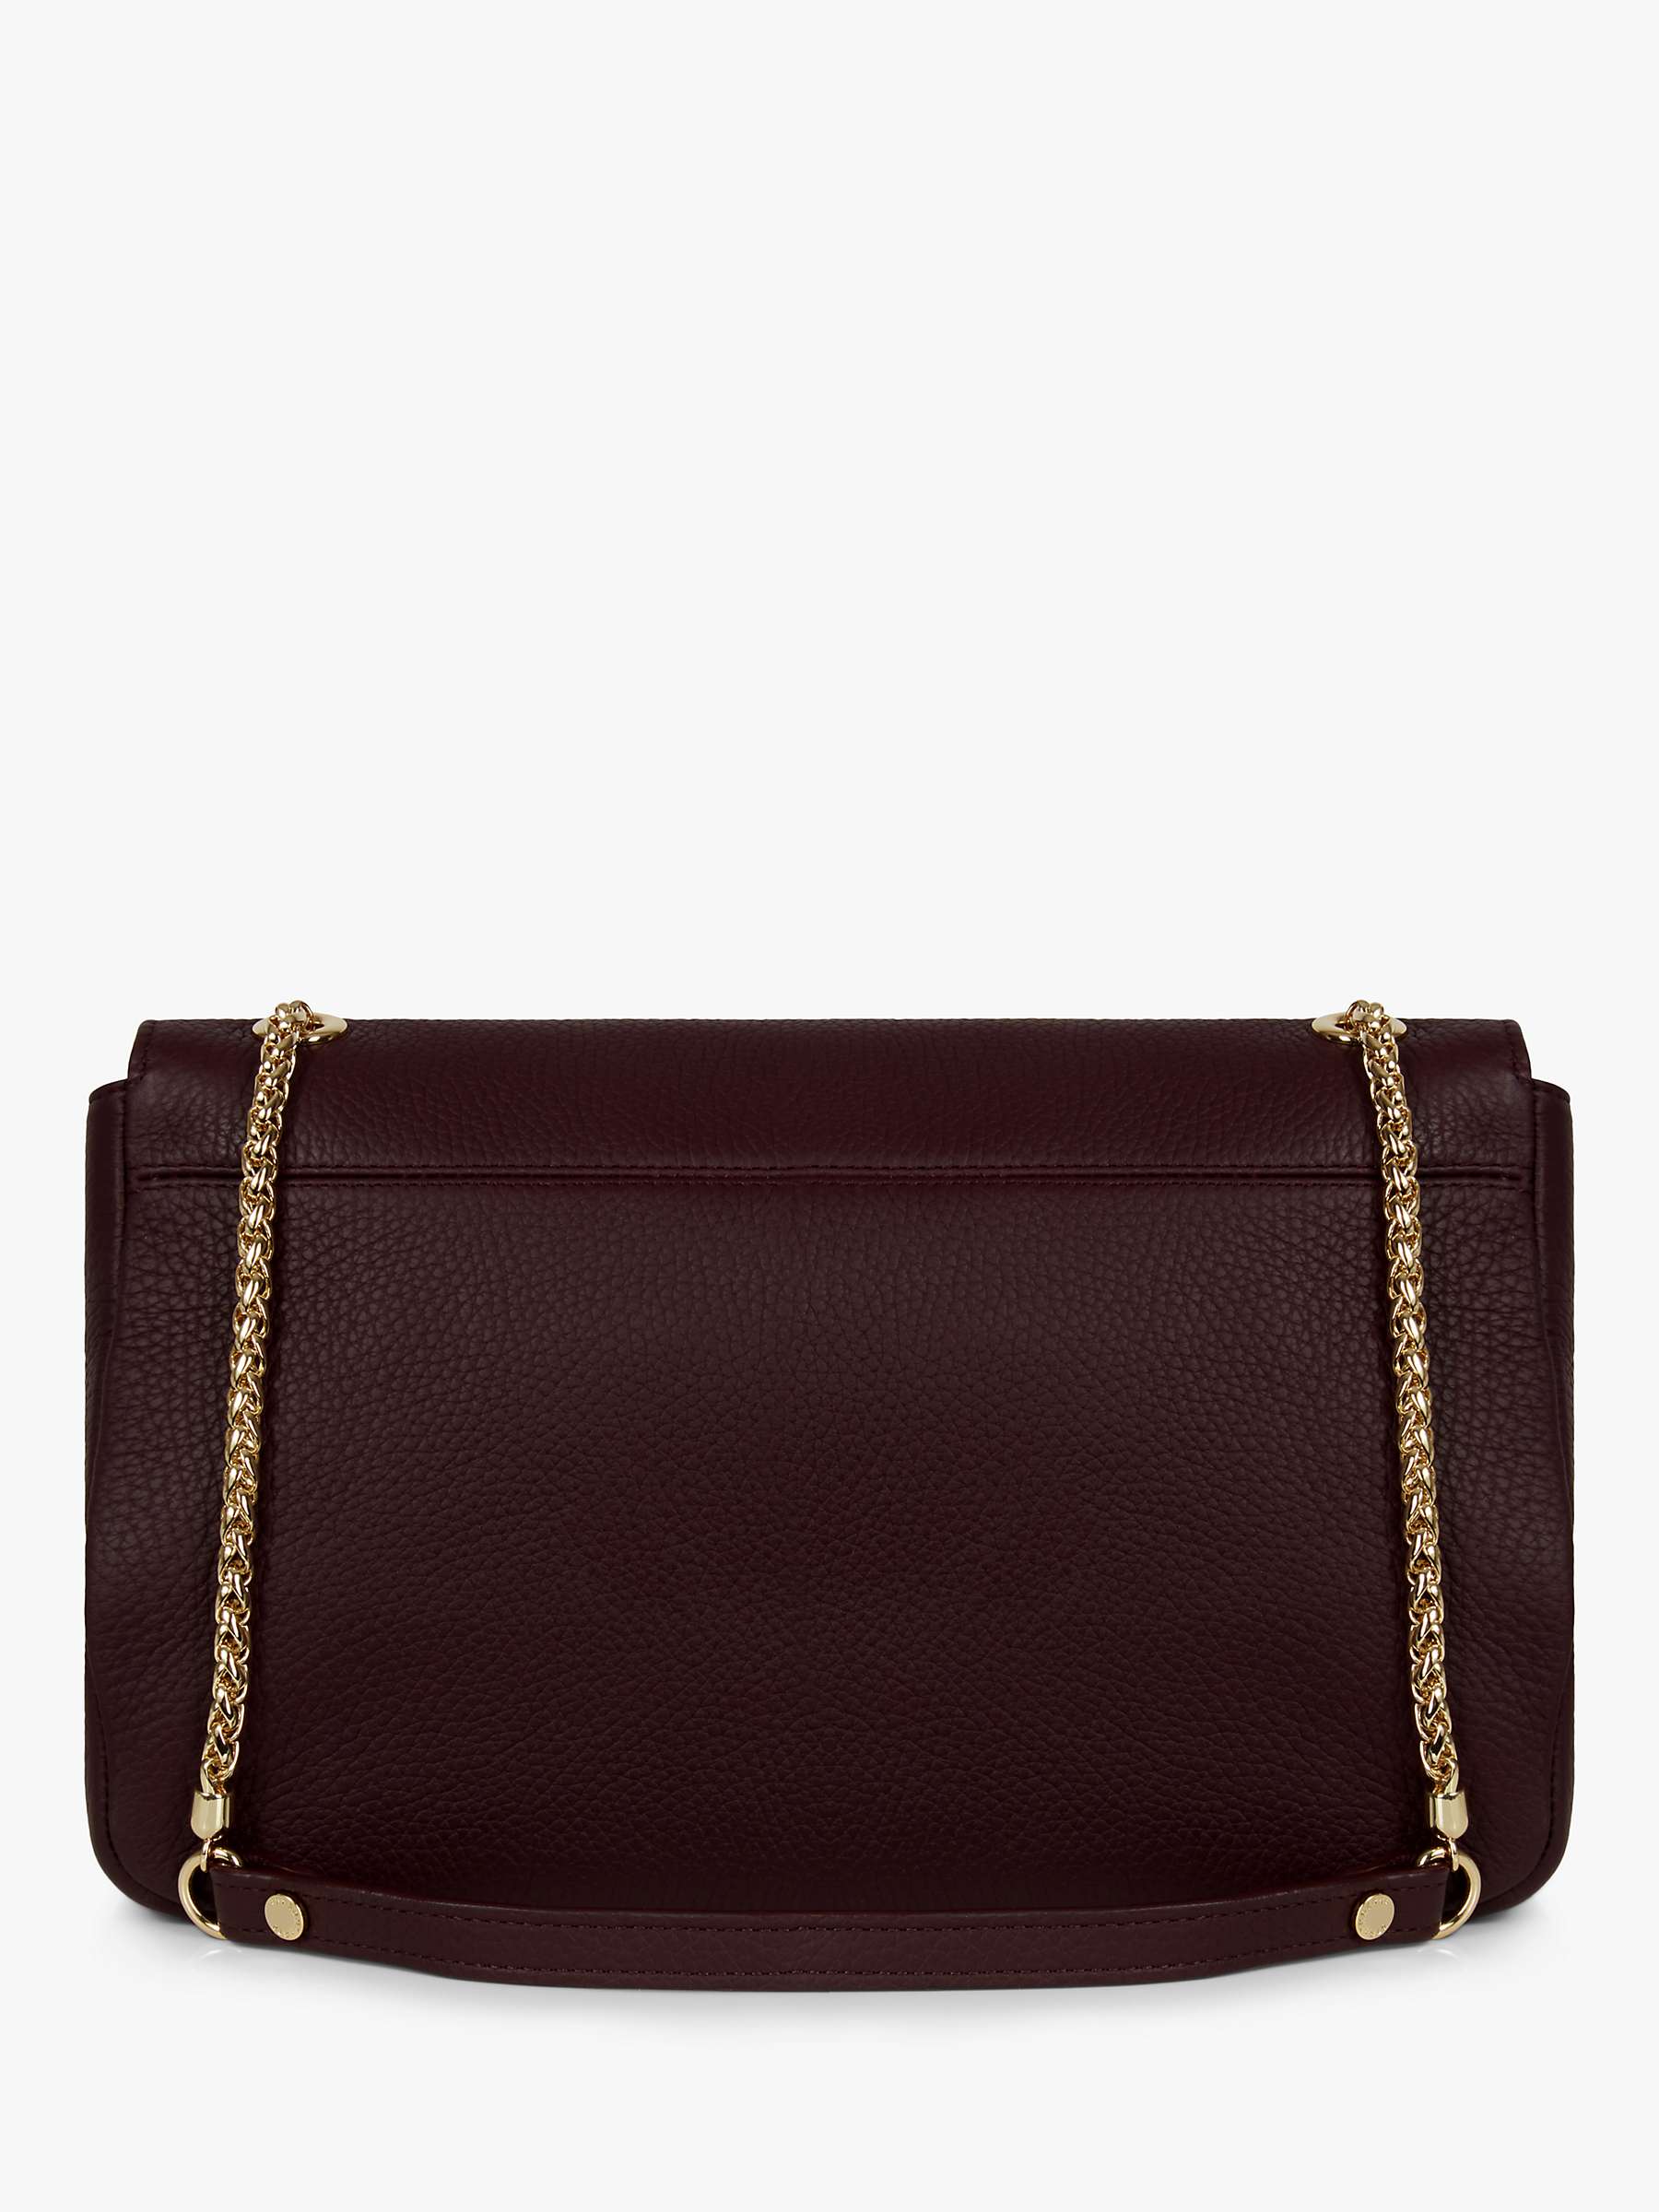 Buy Strathberry East/West Soft Leather Chain Strap Cross Body Bag Online at johnlewis.com